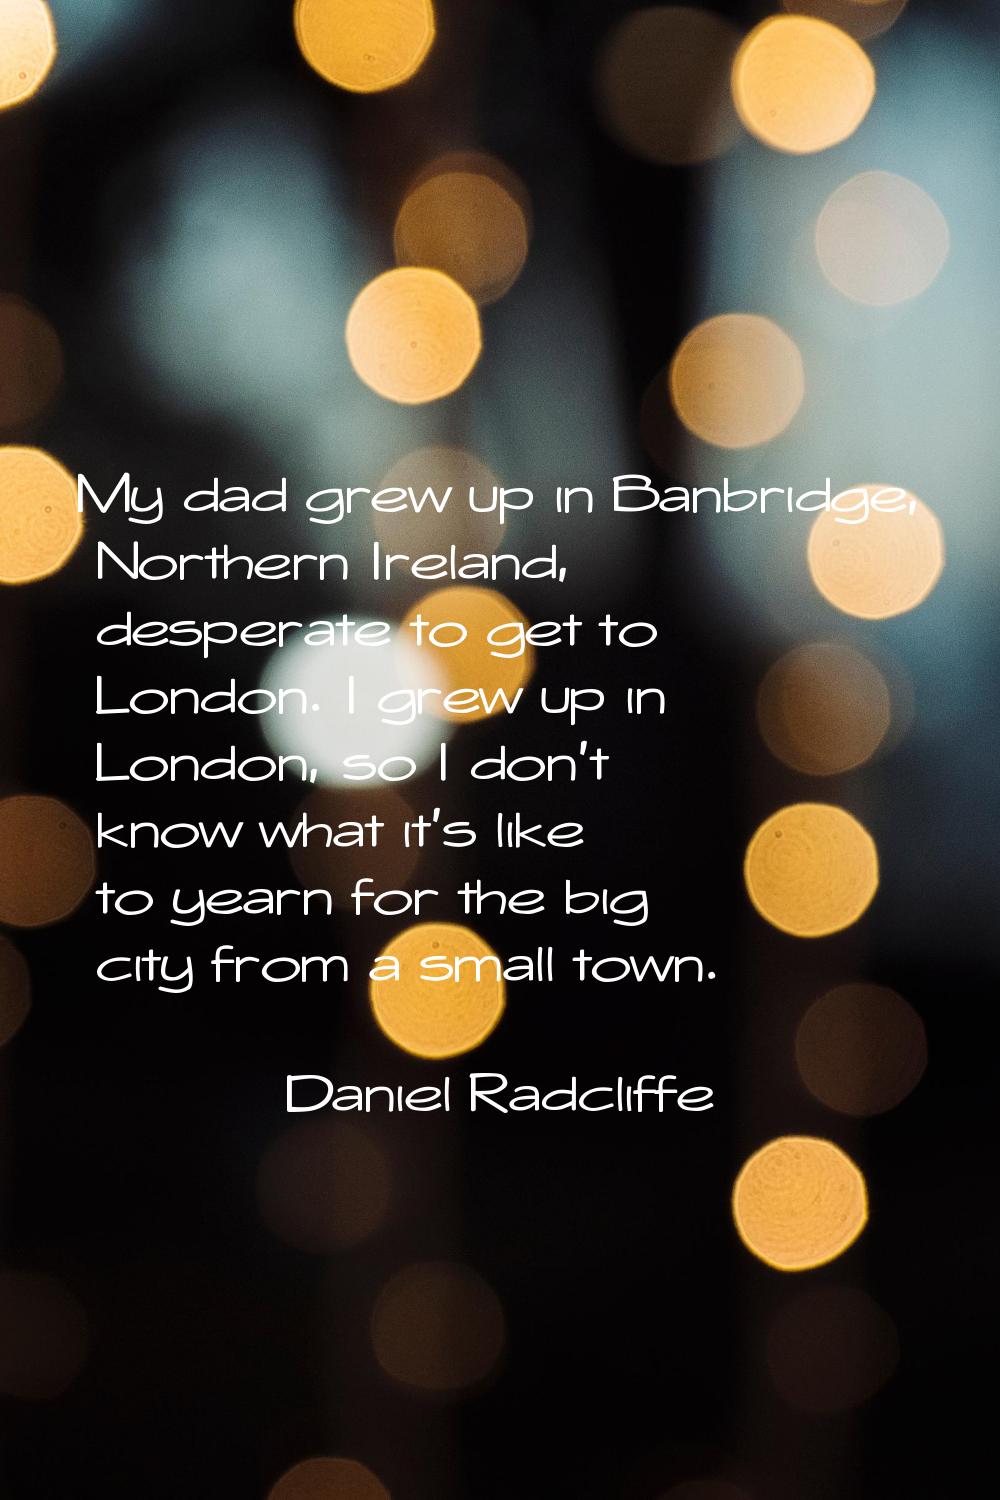 My dad grew up in Banbridge, Northern Ireland, desperate to get to London. I grew up in London, so 